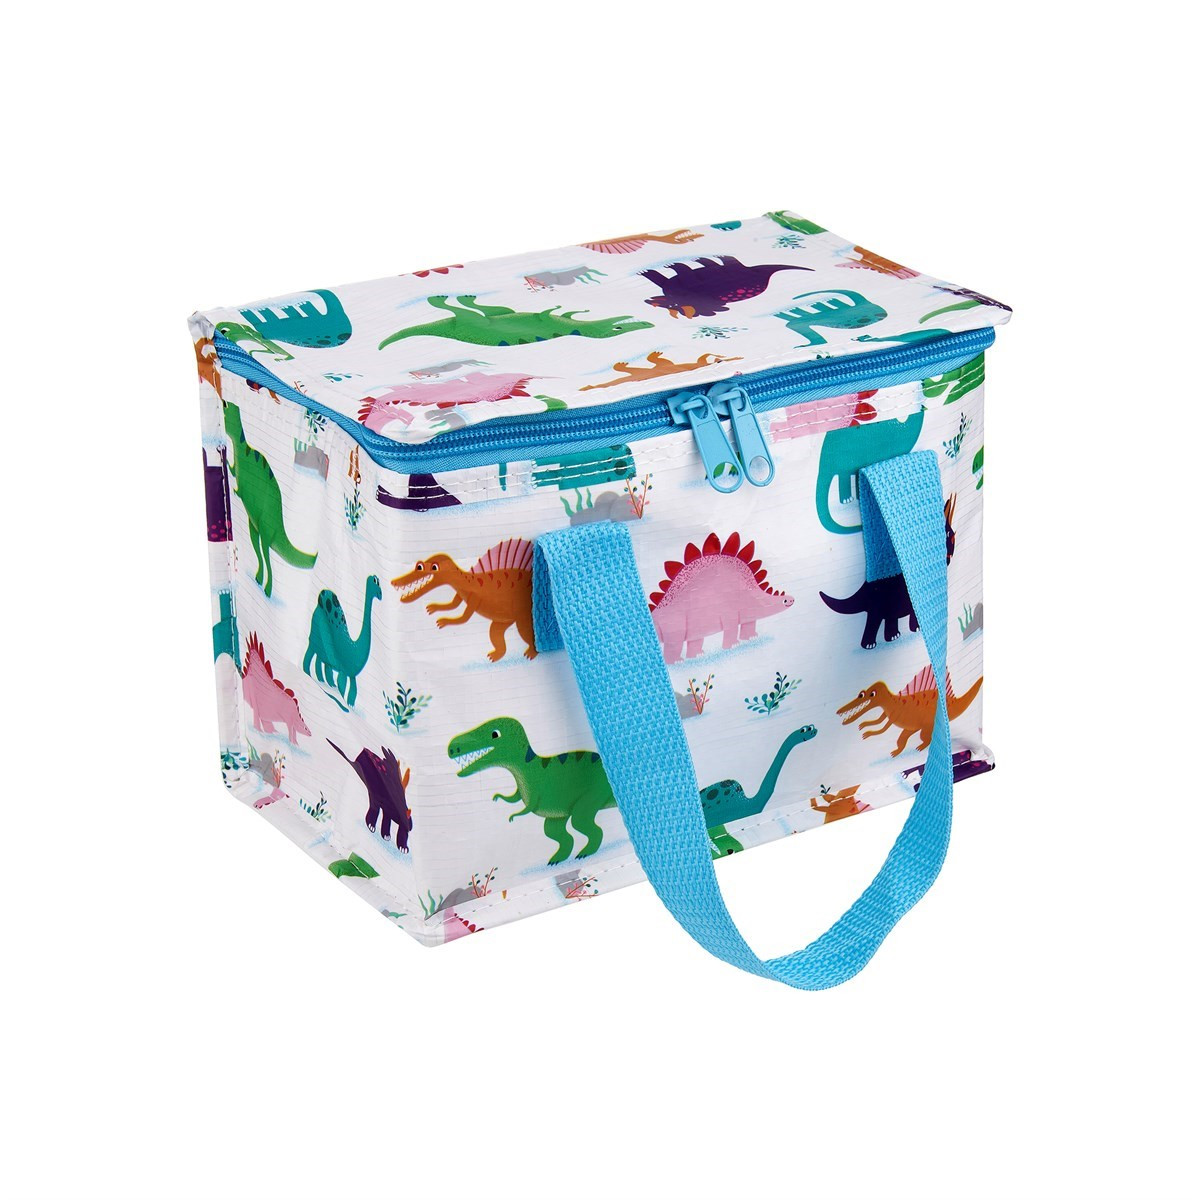 Sass & Belle Roarsome Dino Lunch Bag - Blue>